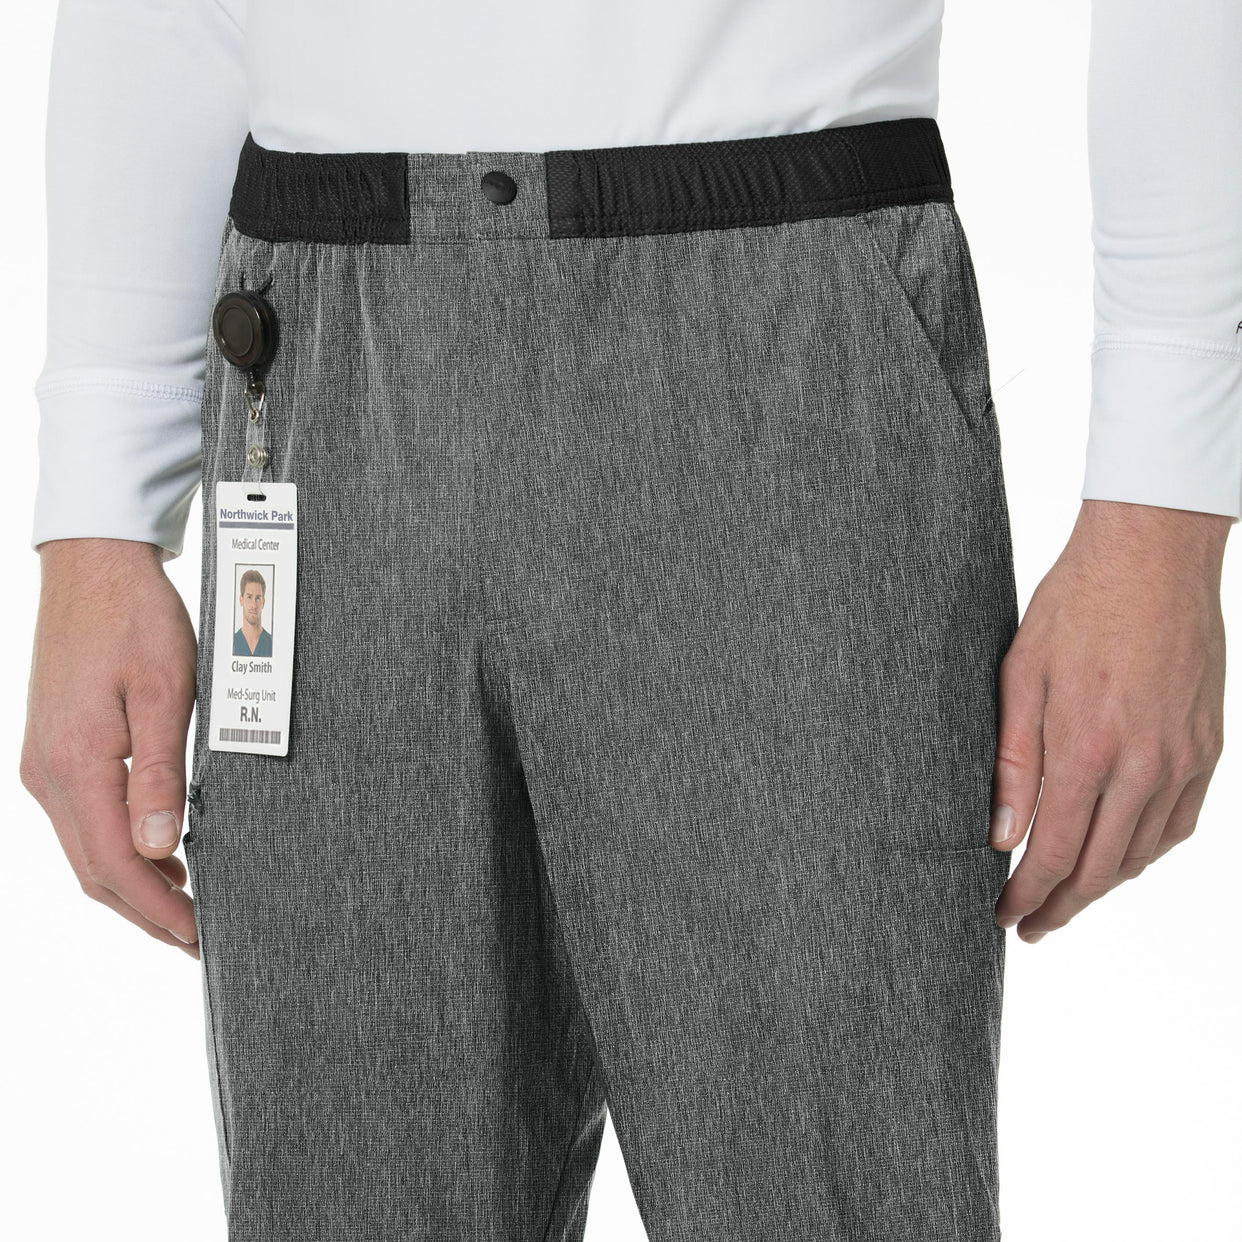 Force Liberty Men's Athletic Cargo Scrub Pant Charcoal Heather front detail